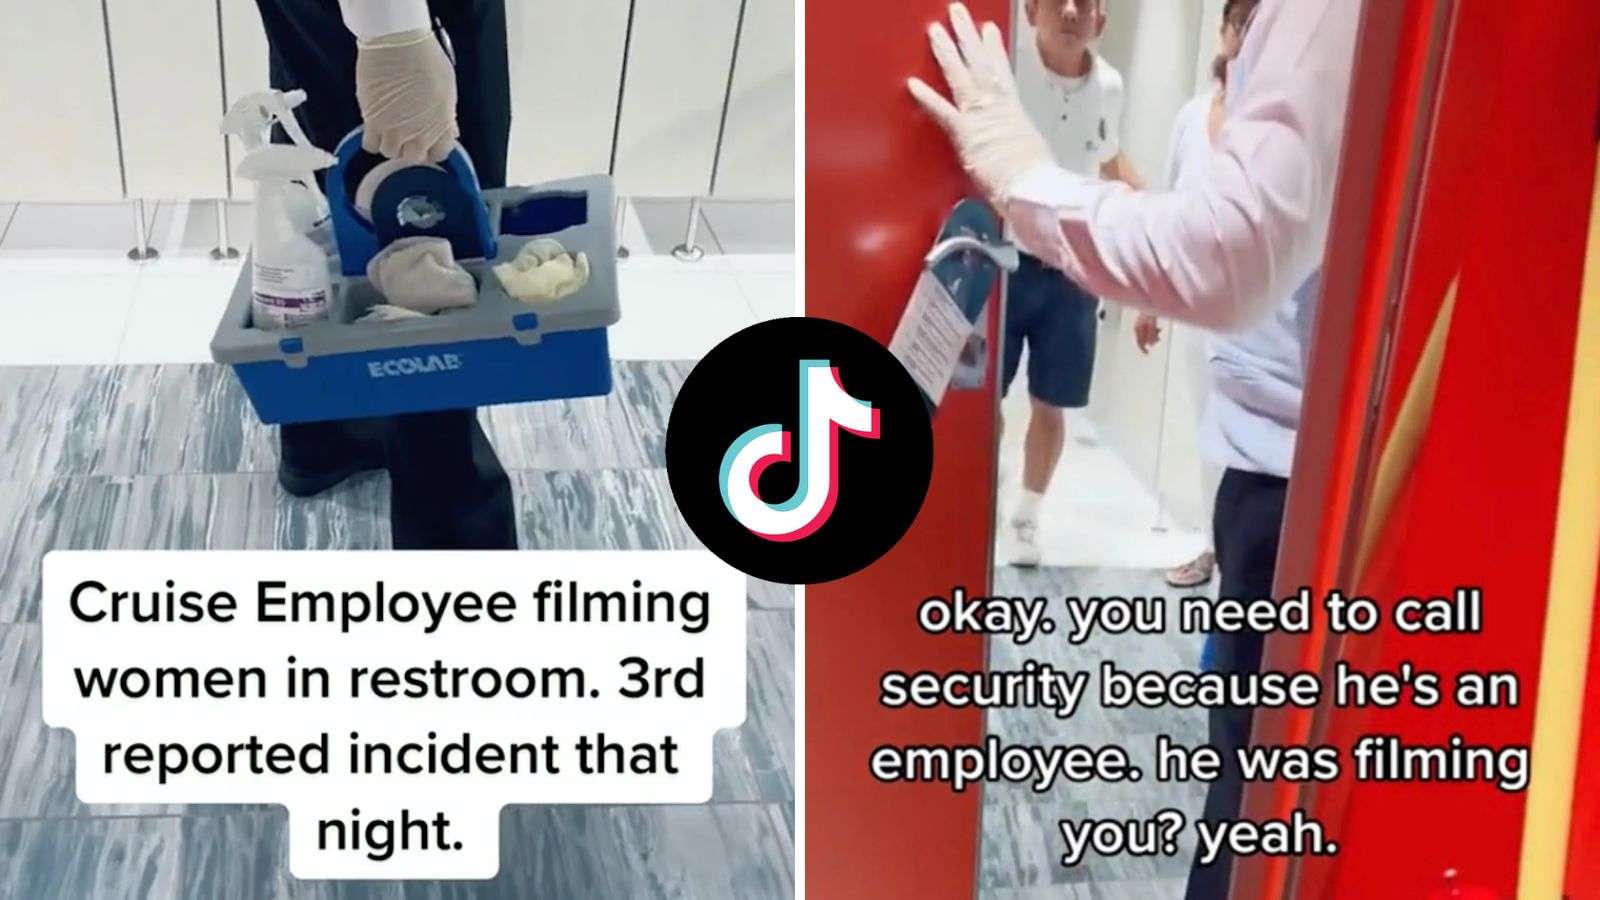 Woman horrified after catching male cruise worker filming her in restroom